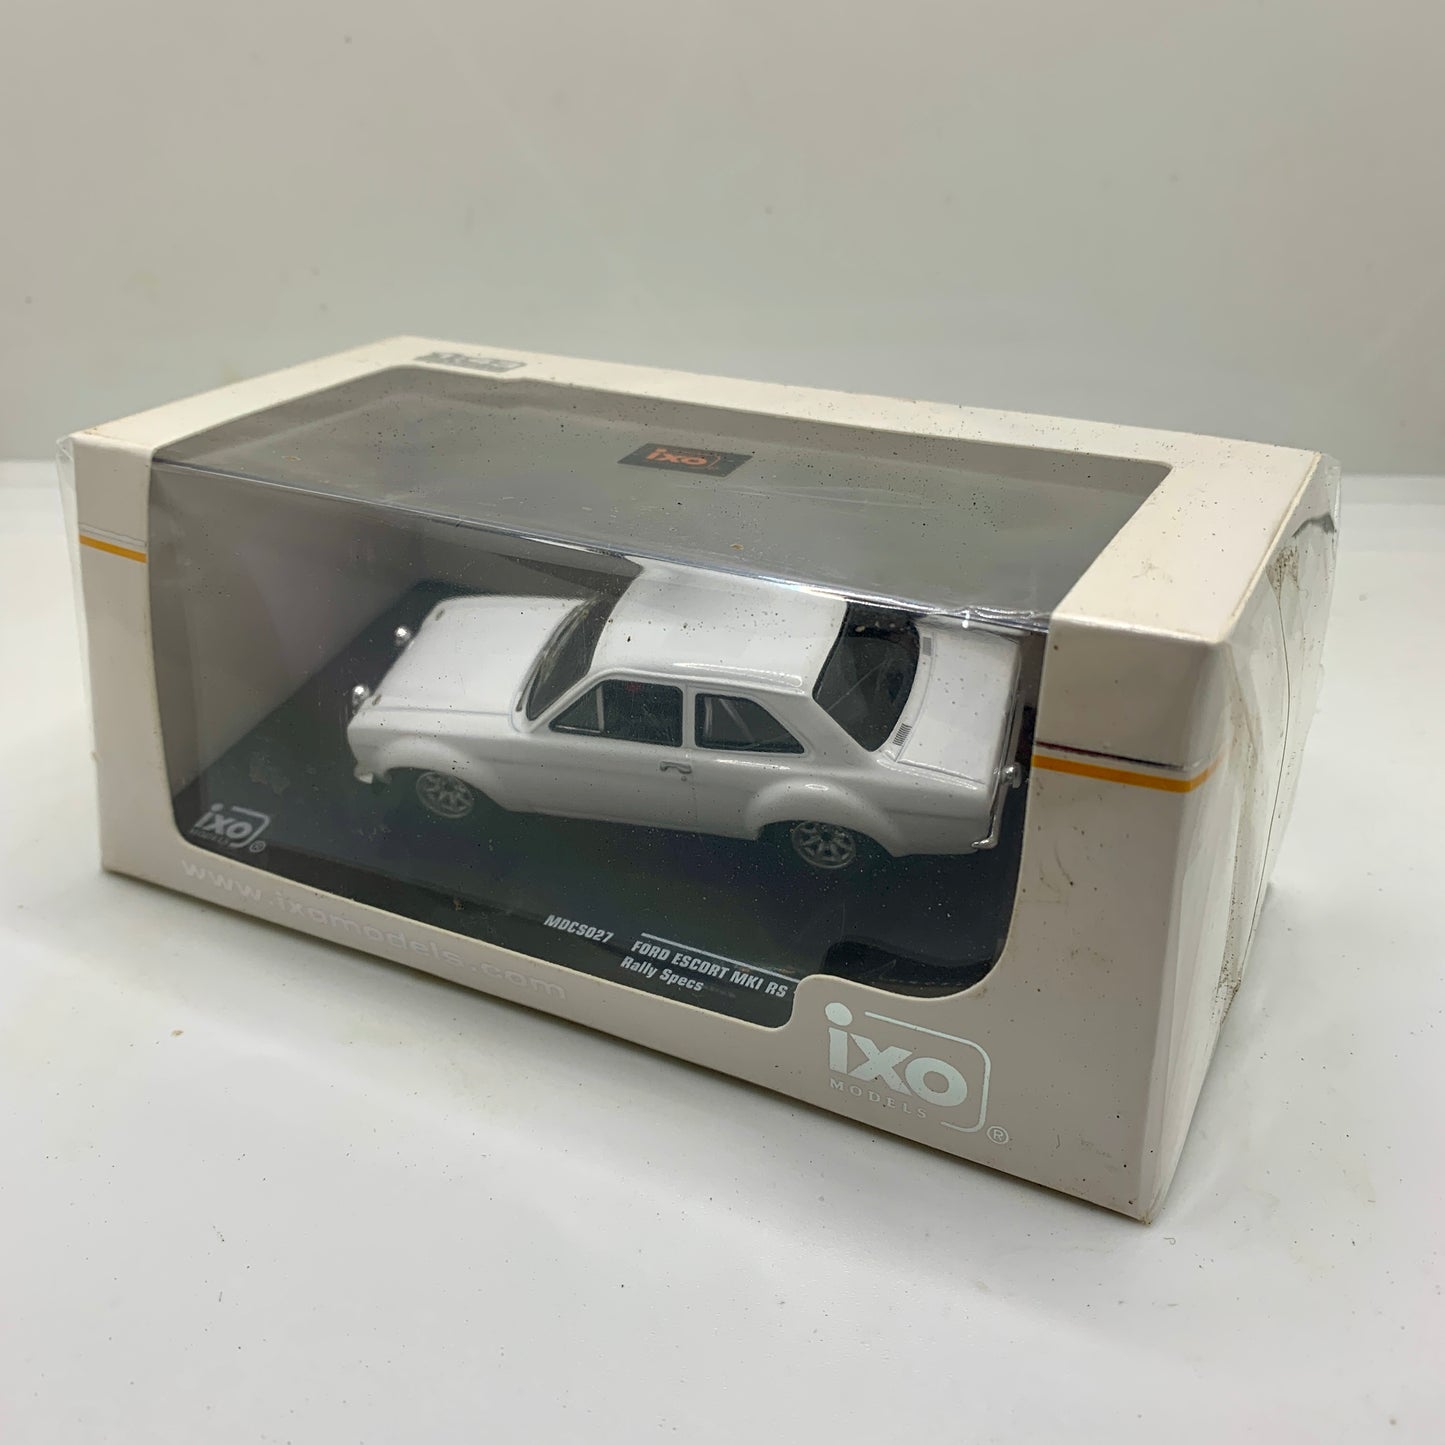 Iconic Ford Escort Collectable Classic Cars 1/43 Scale